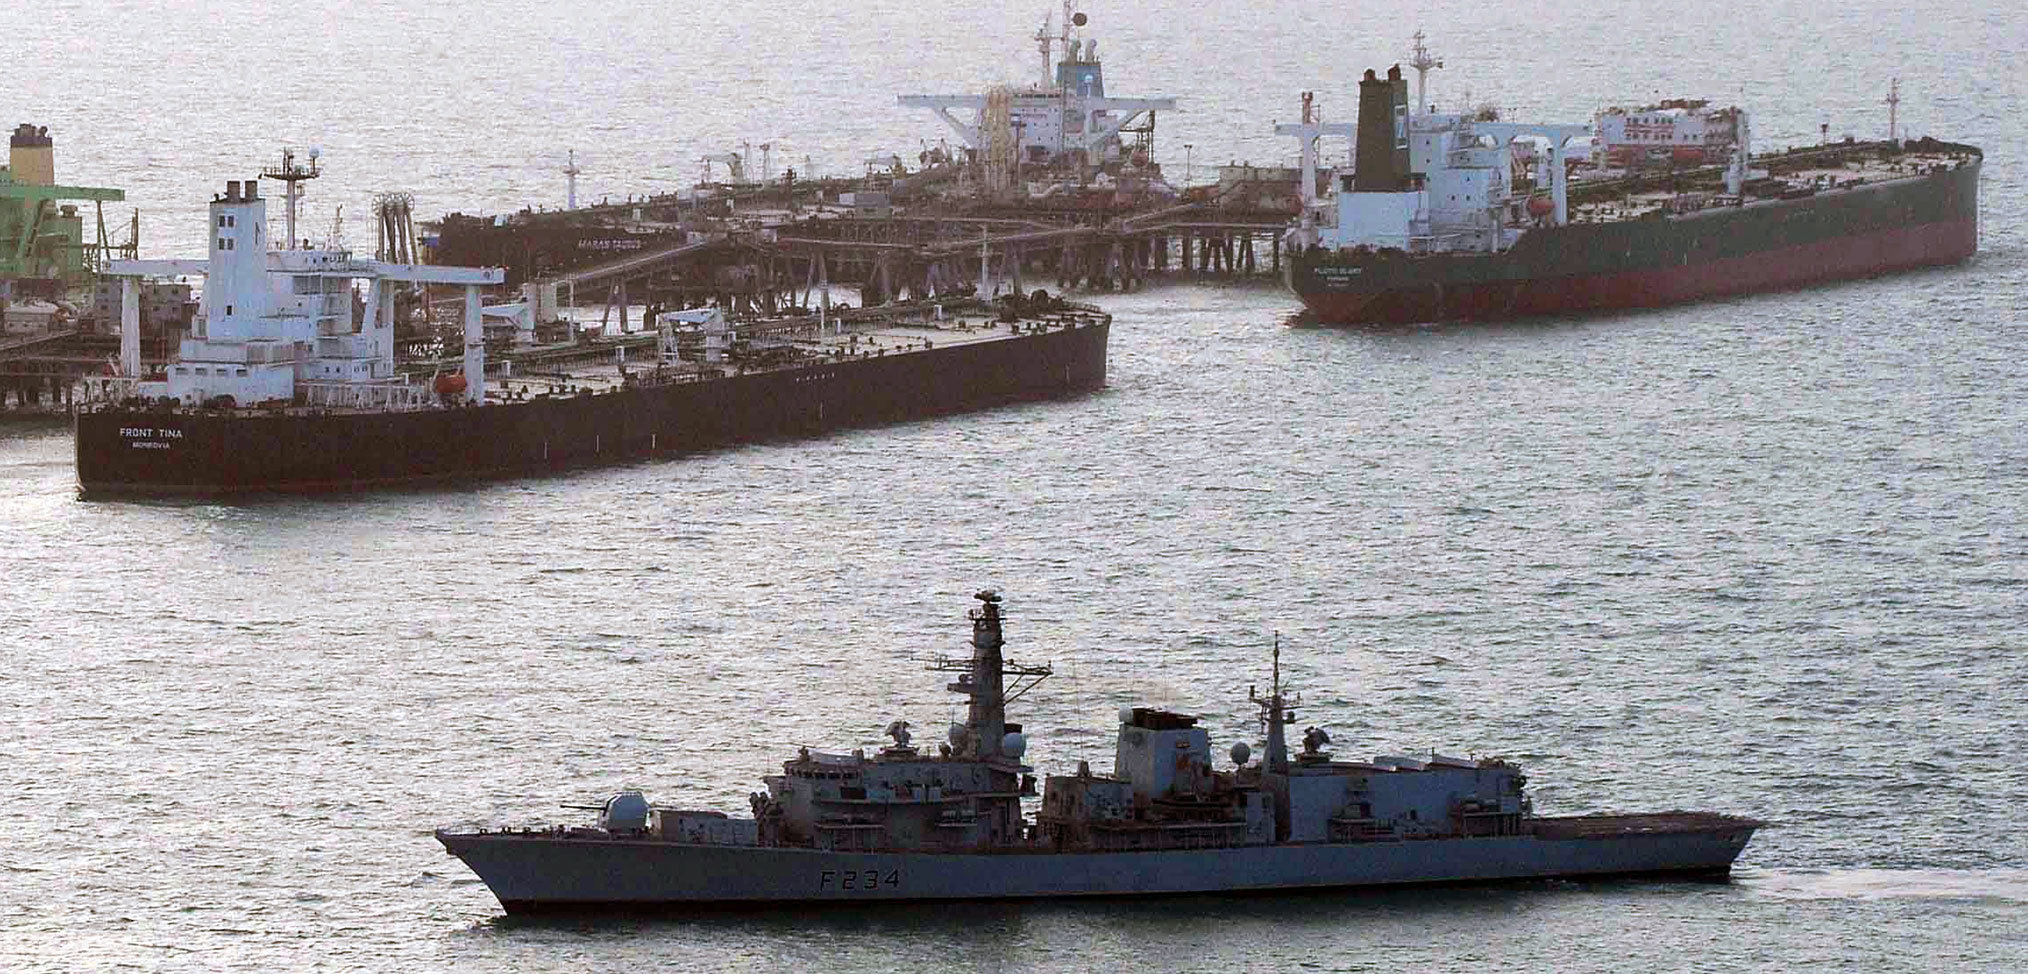 The Royal Navy and escalating tensions in the Arabian Gulf